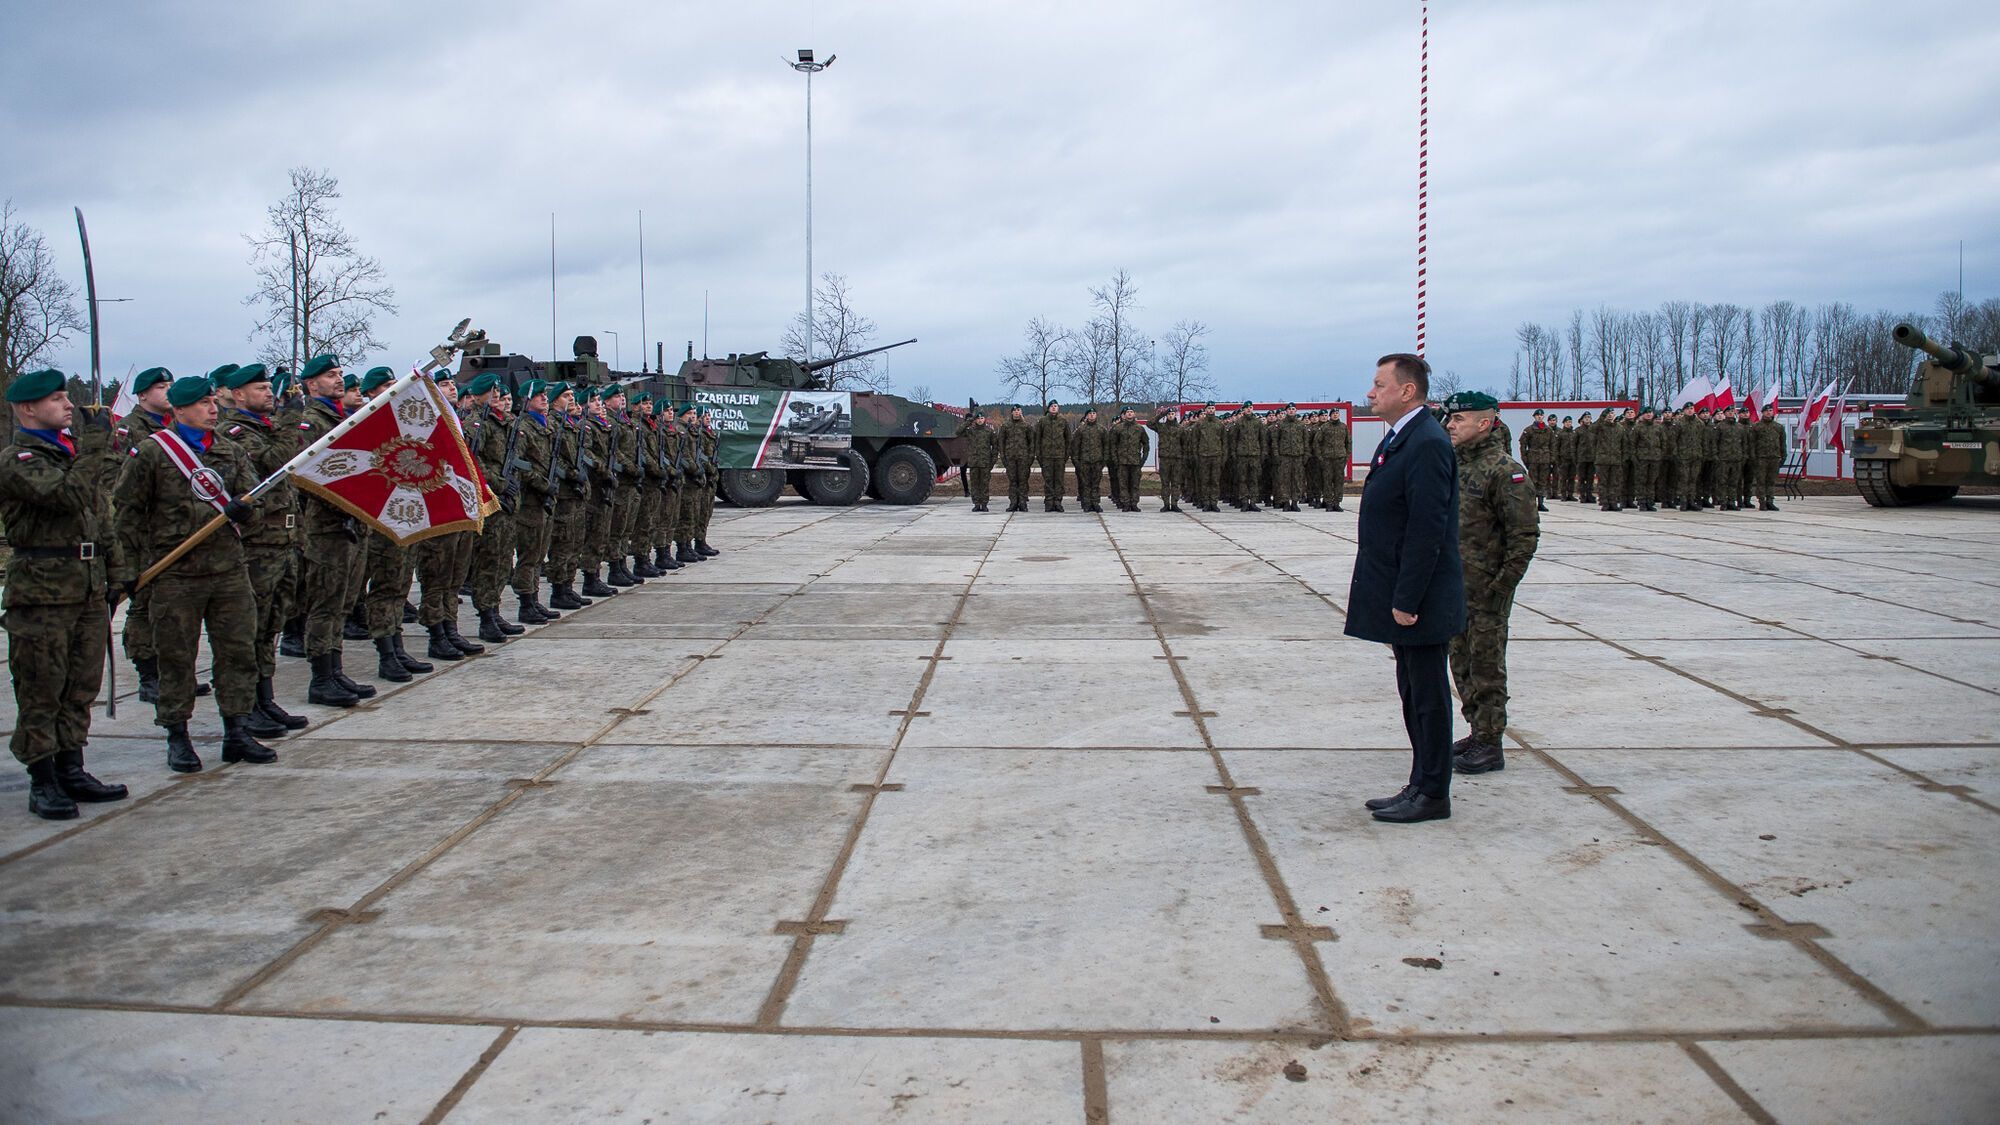 Poland deploys a new tank battalion equipped with South Korean K2 tanks near the border with Belarus